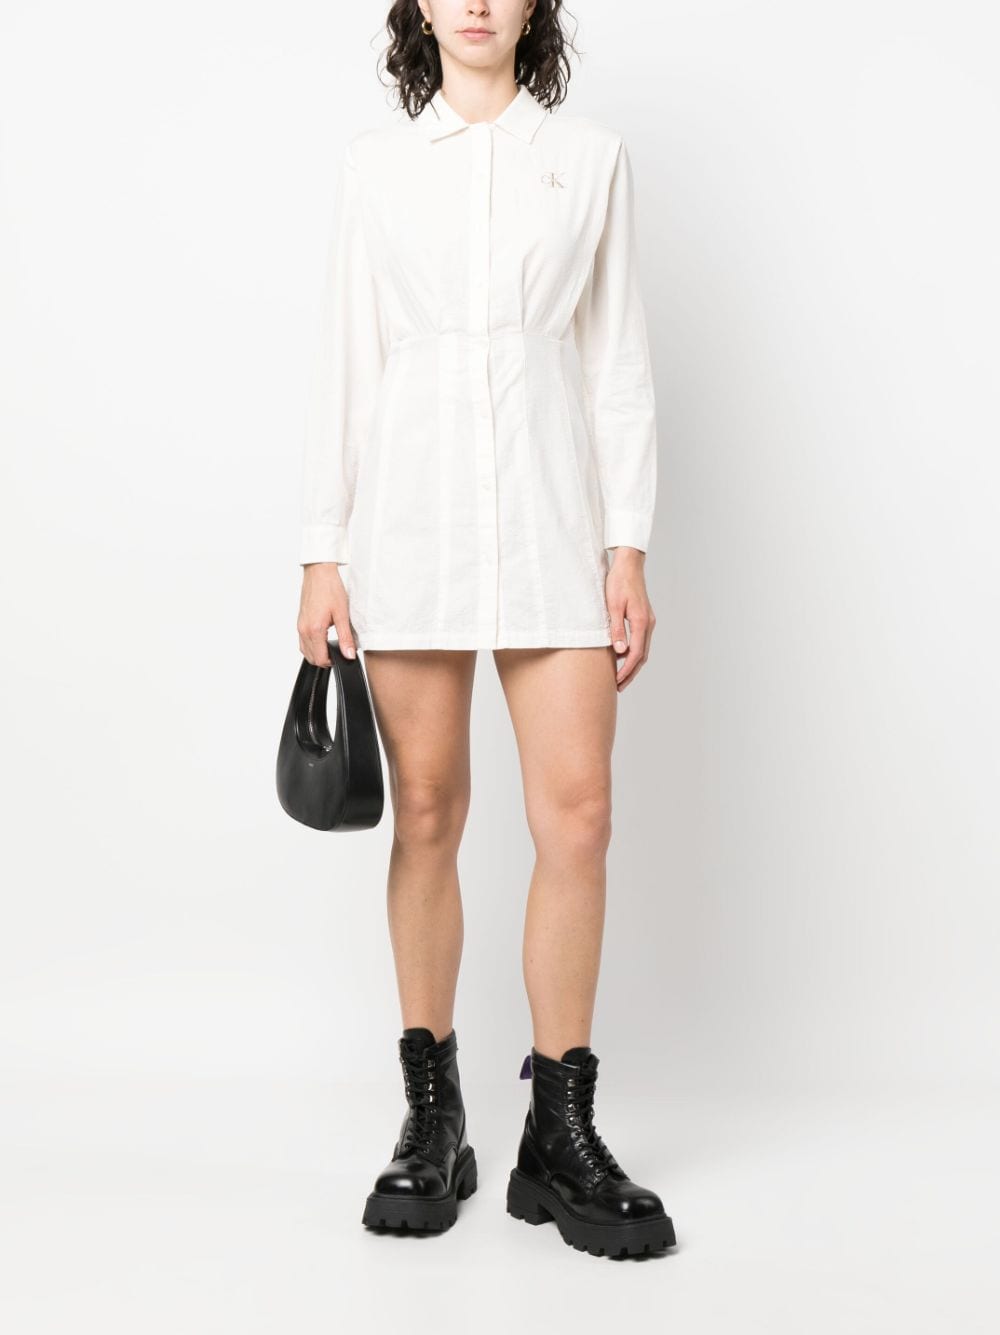 Image 2 of Calvin Klein Jeans logo-embroidered cotton shirt dress